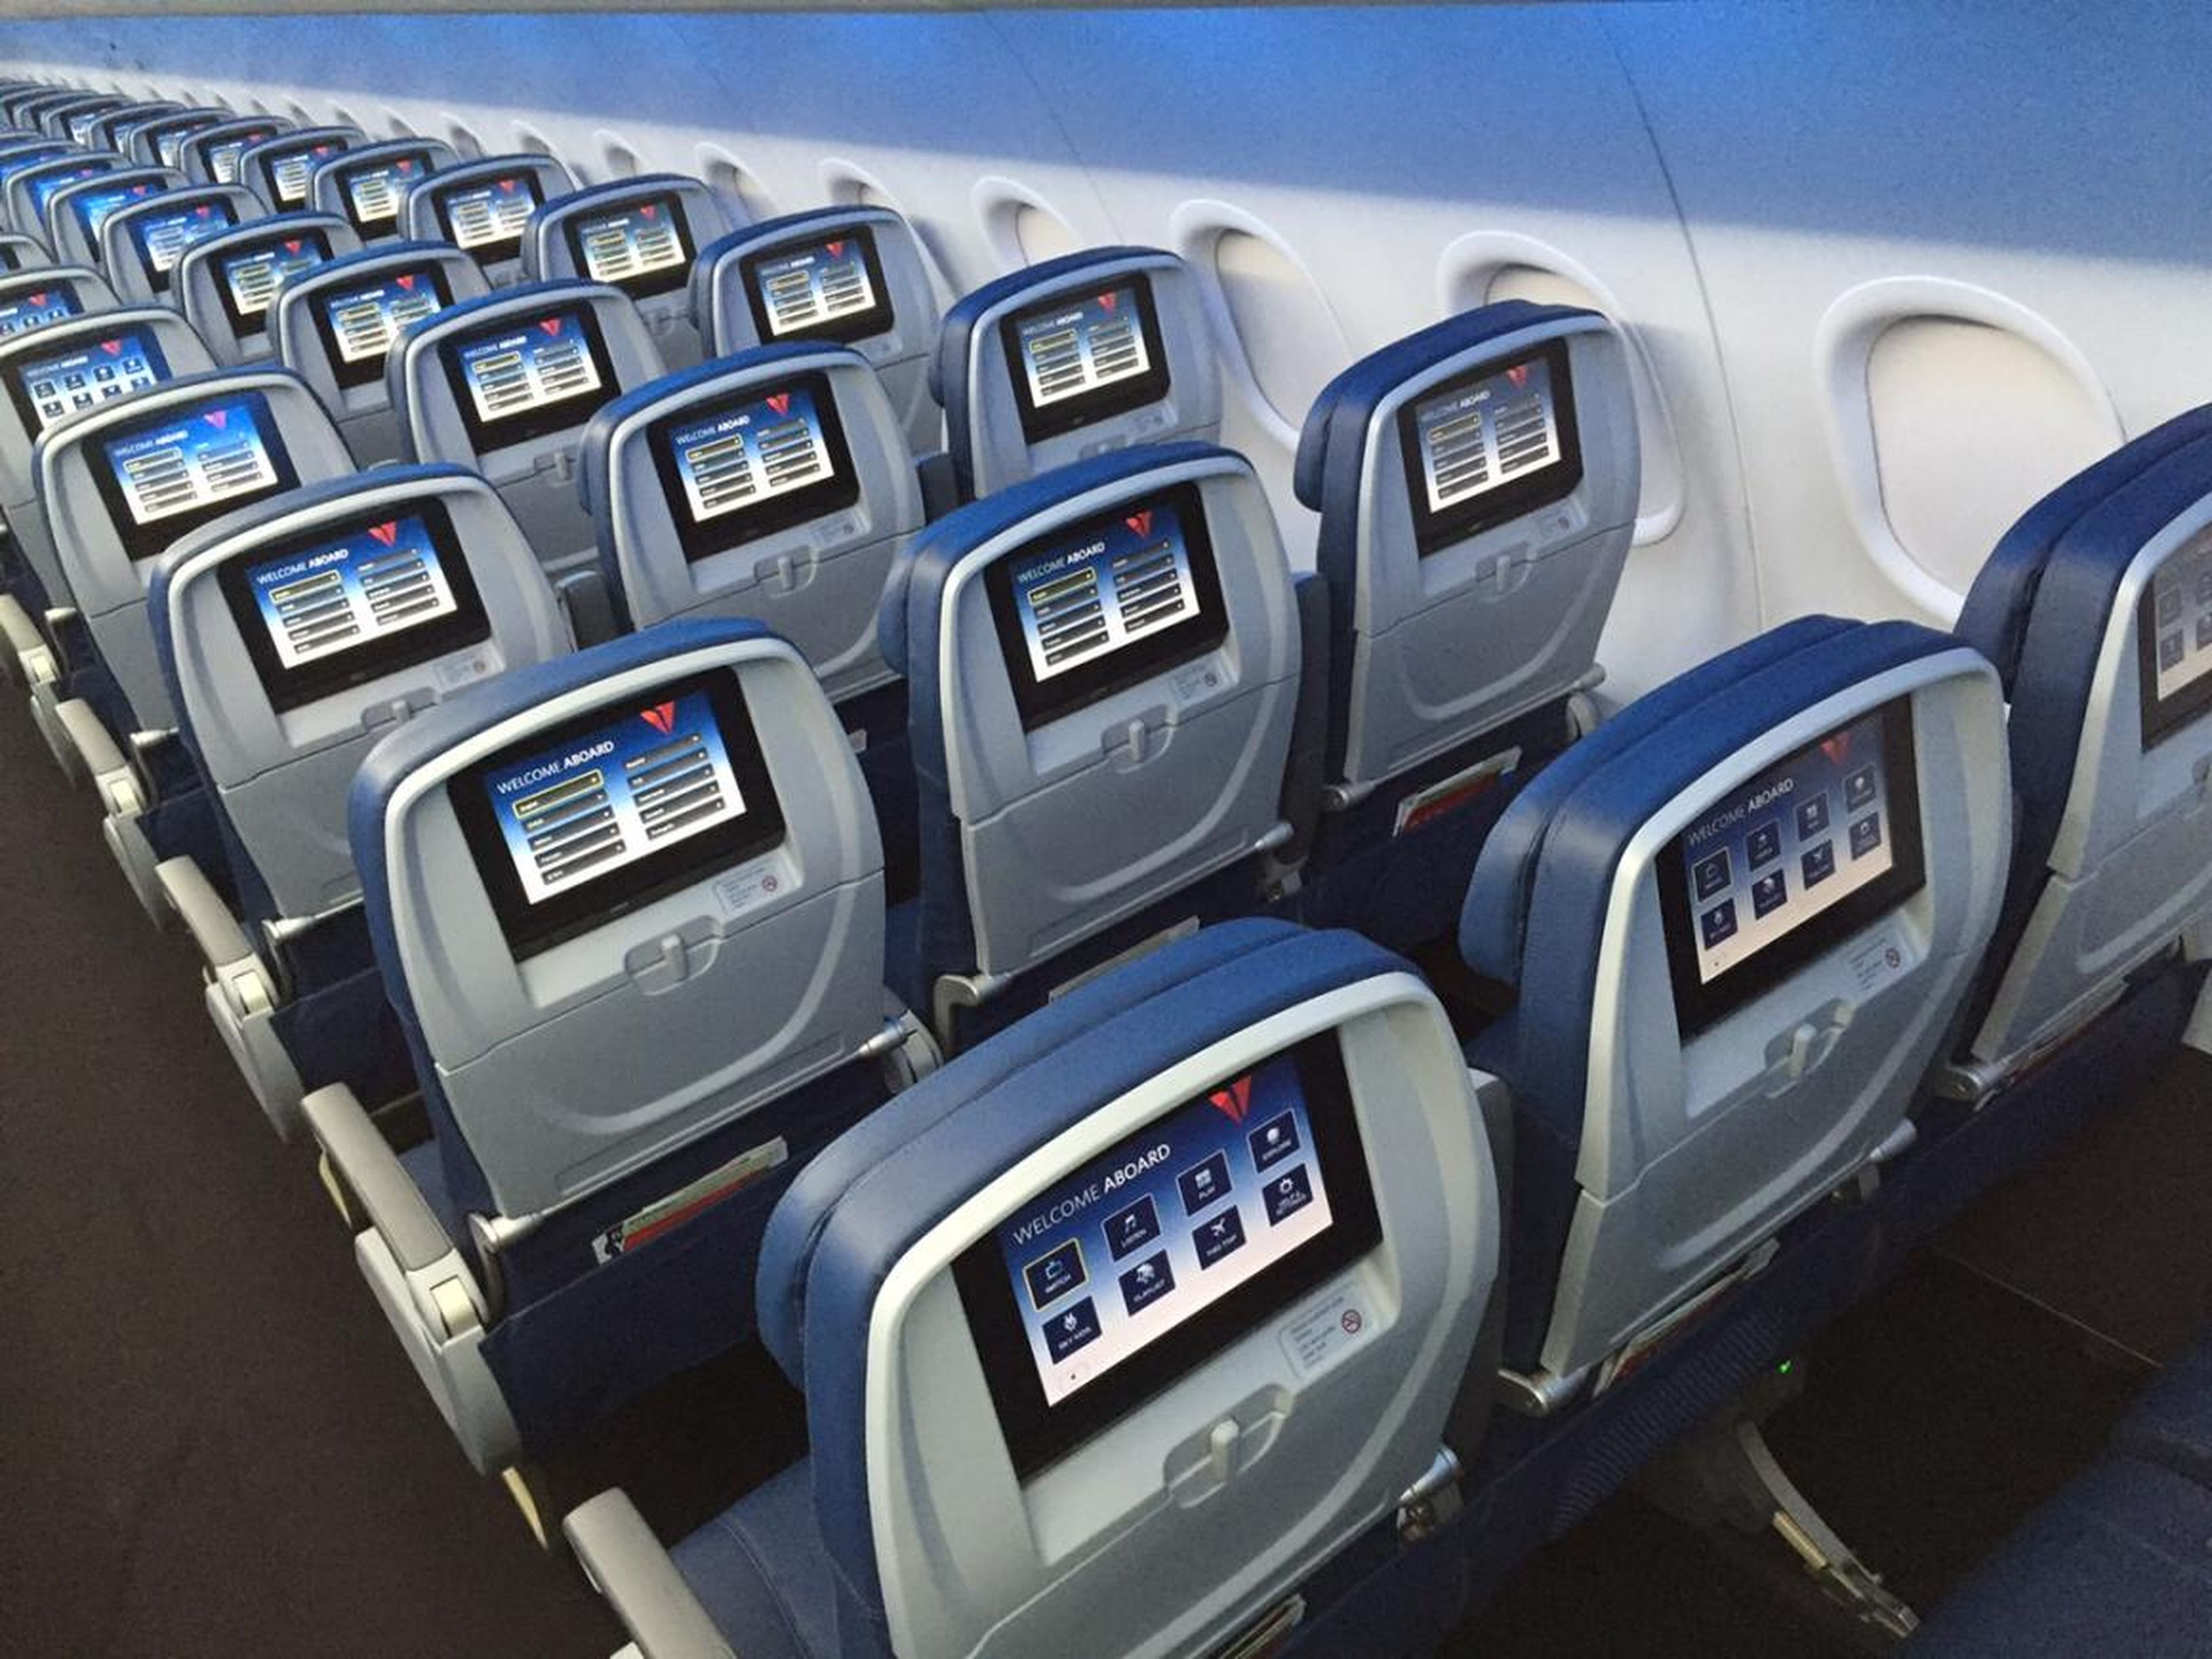 These days more airlines either offer free-streaming entertainment options or personal in-flight entertainment systems.